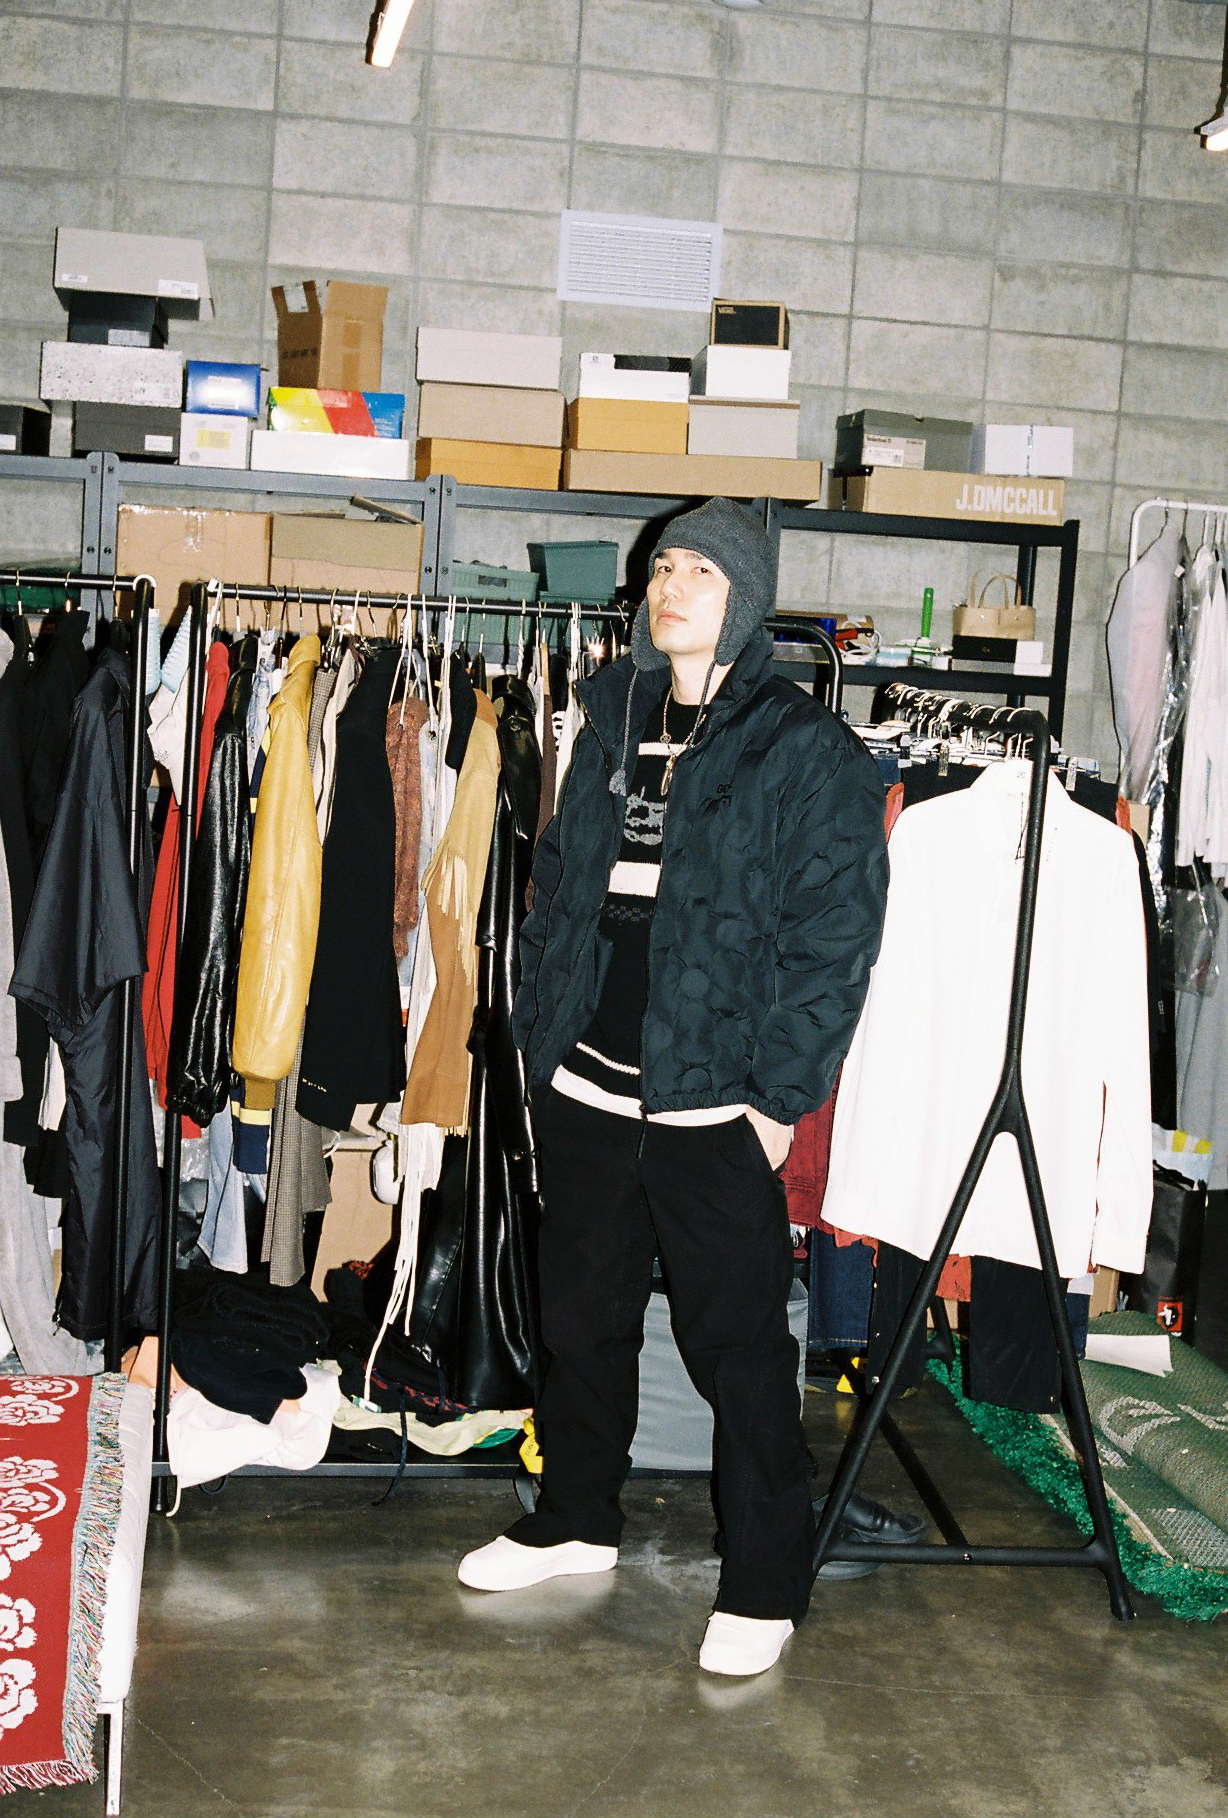 stylist fwanwook jung stands in front of some busy rails of clothing 